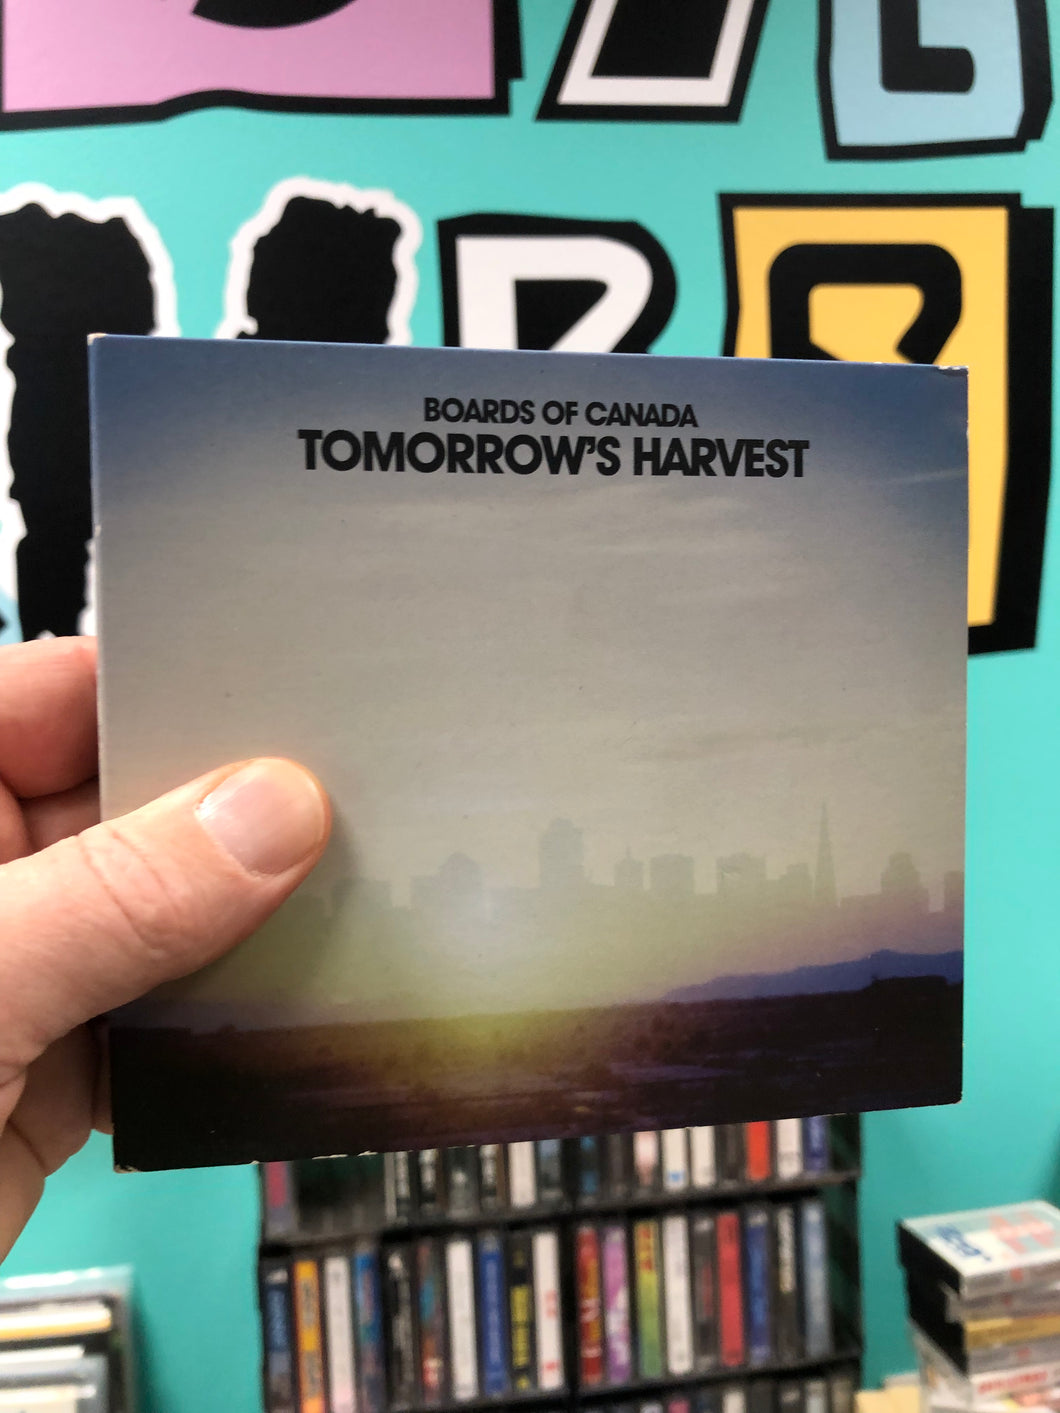 Boards of Canada: Tomorrow’s Harvest, CD, OG pressing, Limited Edition, UK & Europe 2013